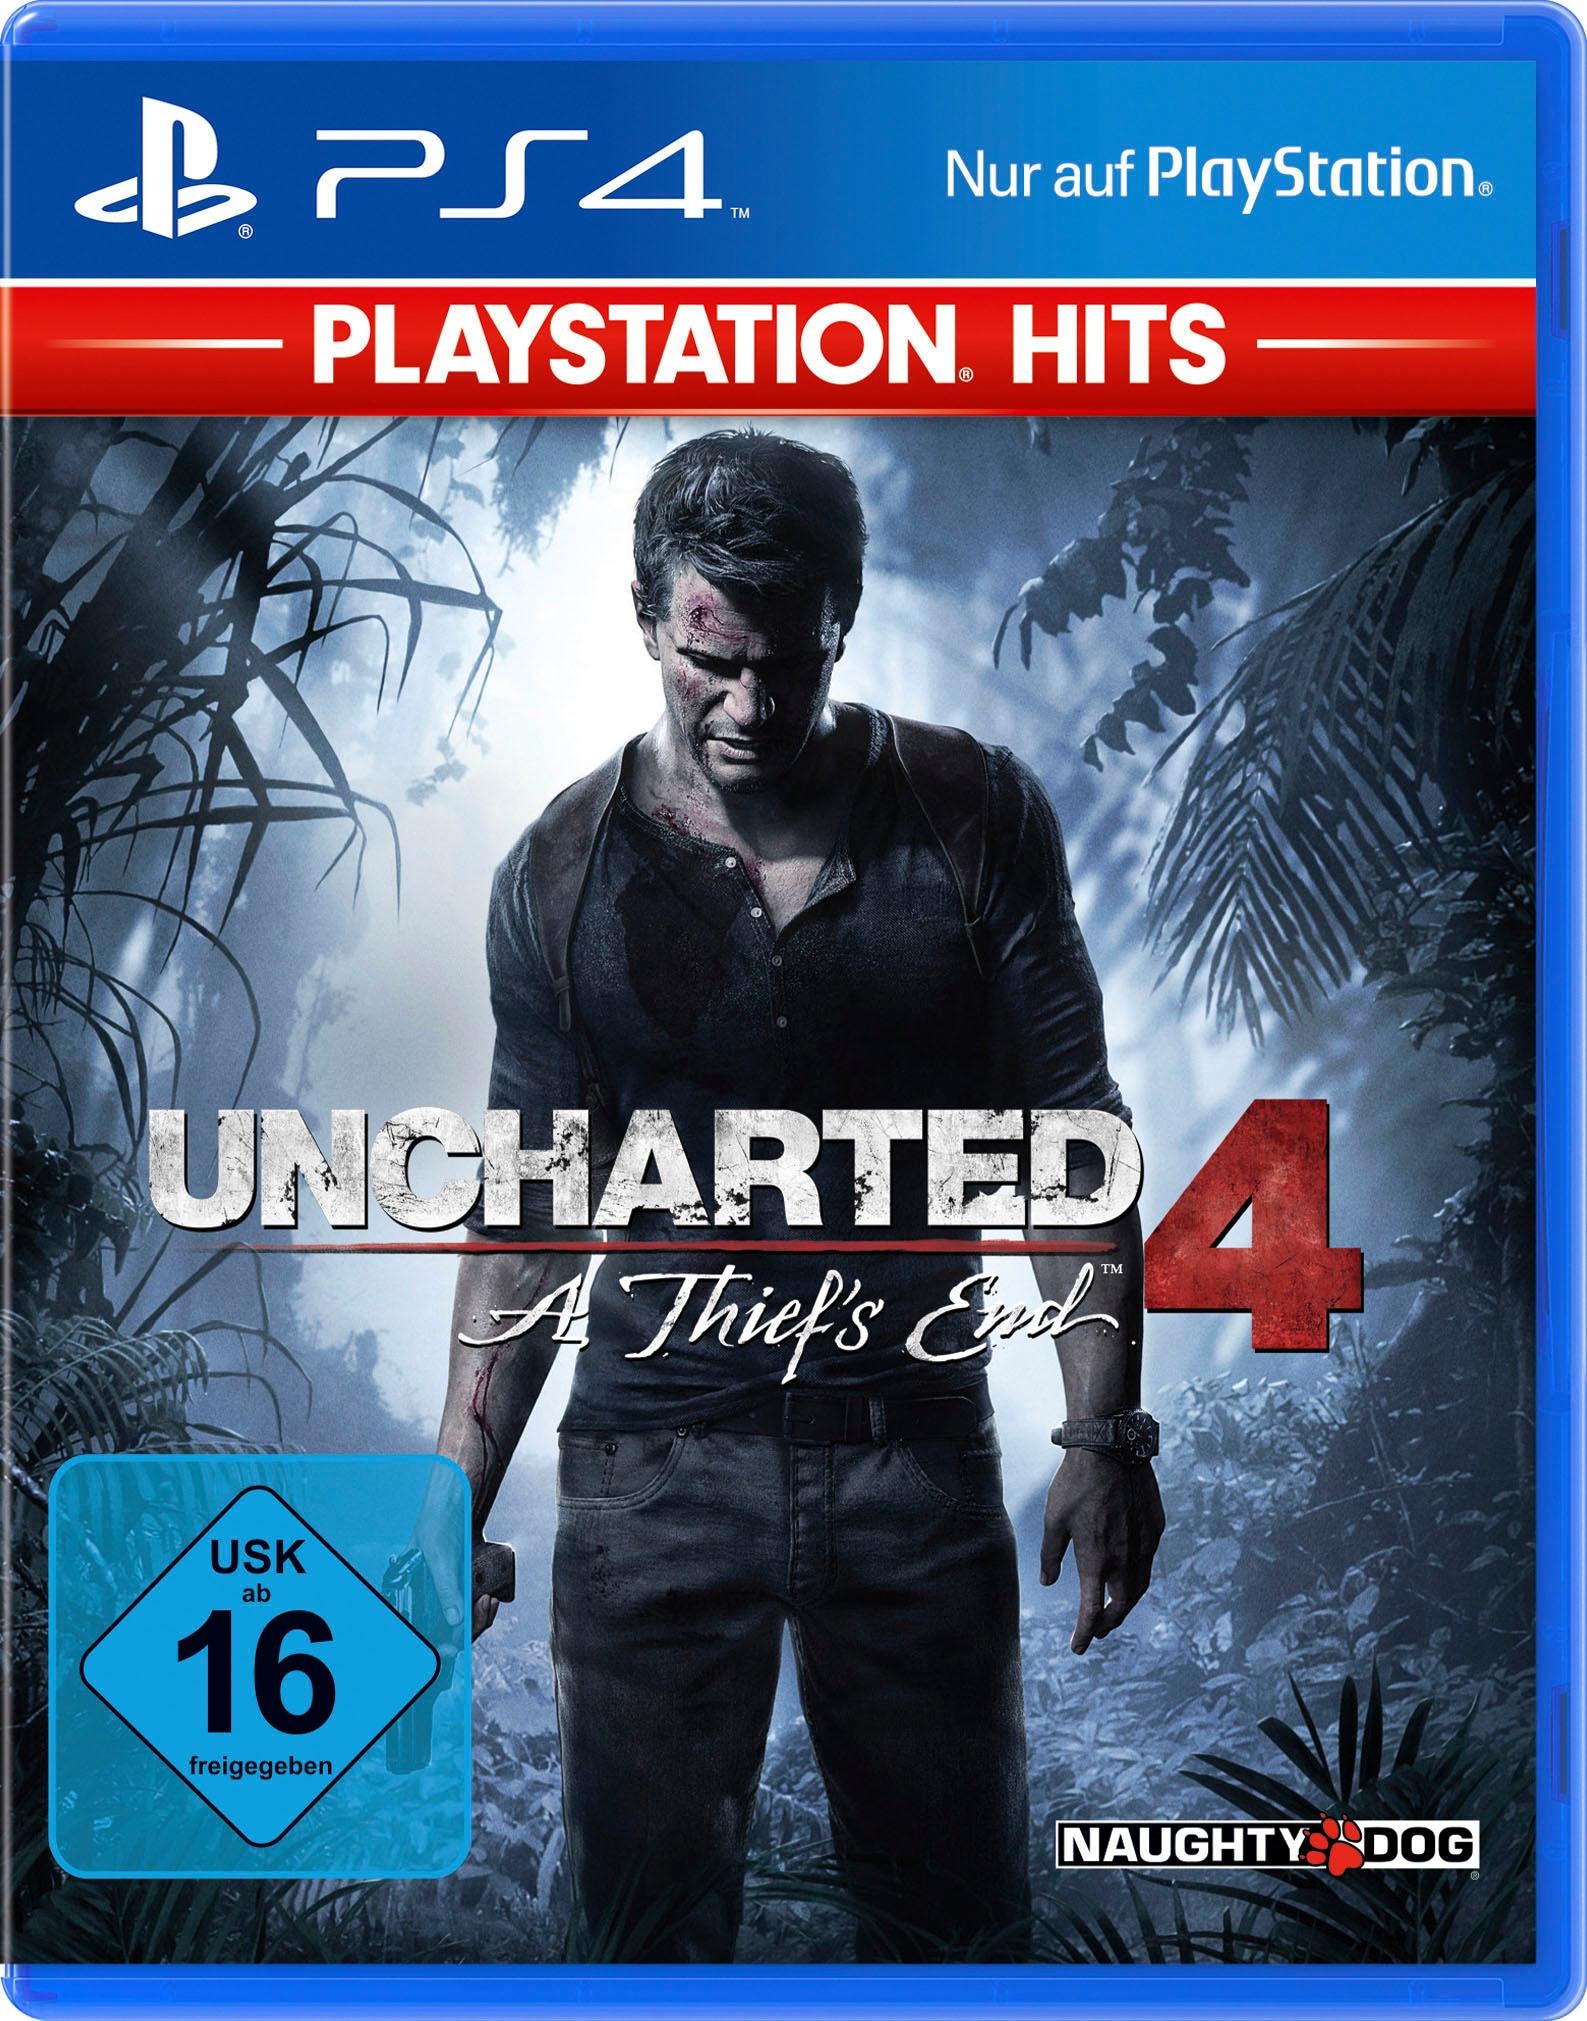 PlayStation 4 Spielesoftware »Uncharted 4 A Thief's End«, PlayStation 4, Software Pyramide